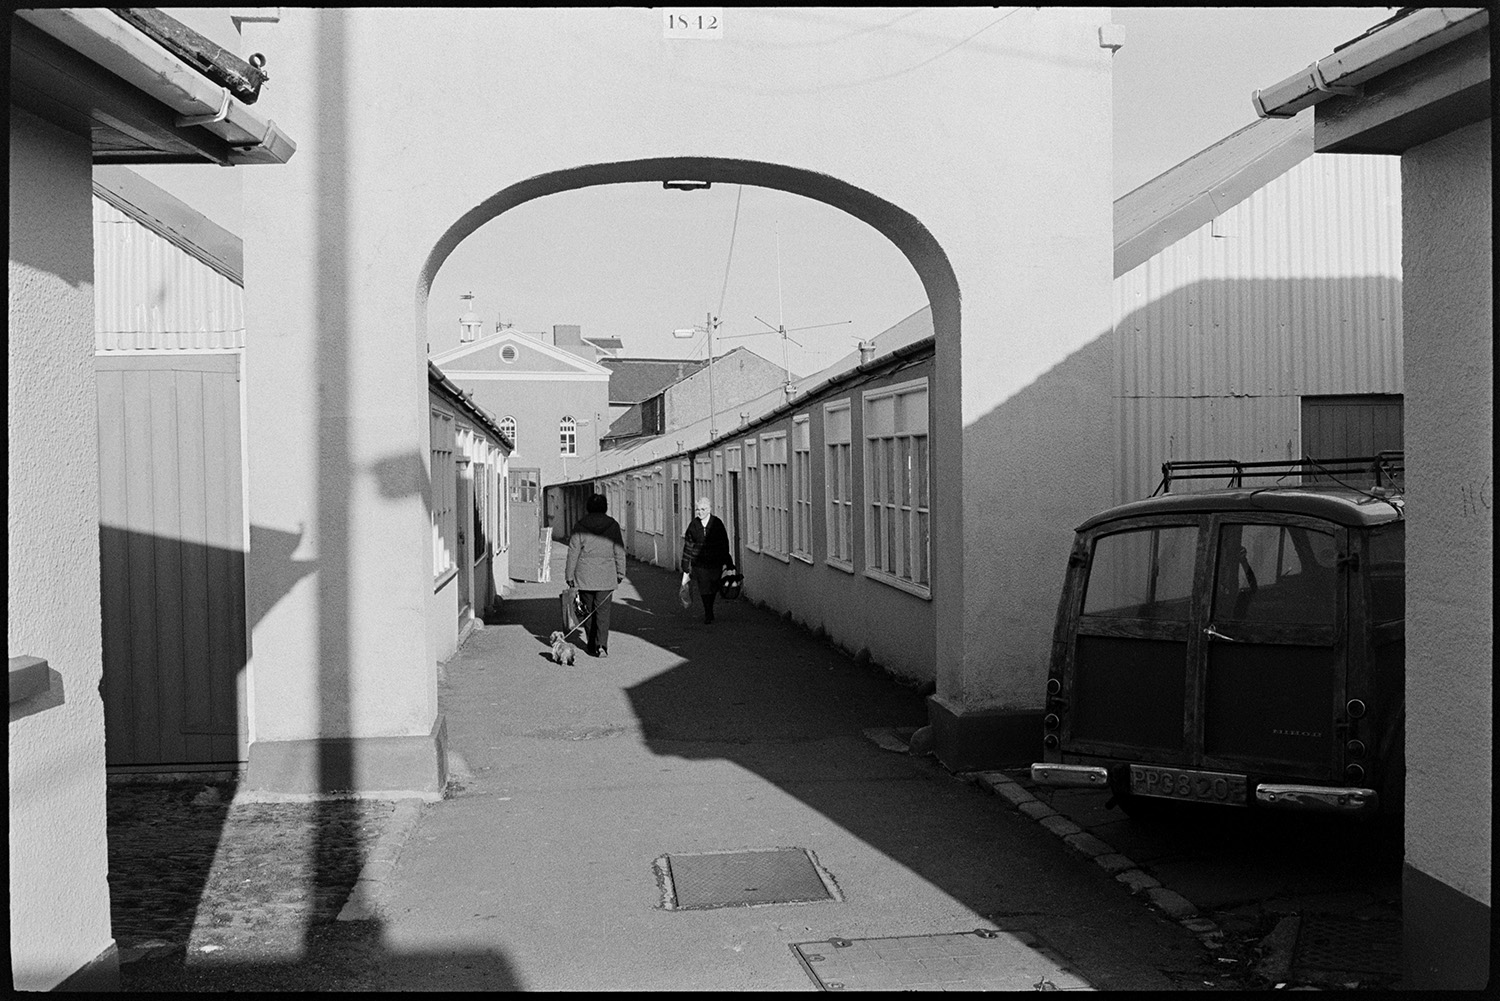 View through arch to market. 
[A van parked by the archway to Torrington Market. Two people are walking past the shops in the market. One of them is walking a dog.]